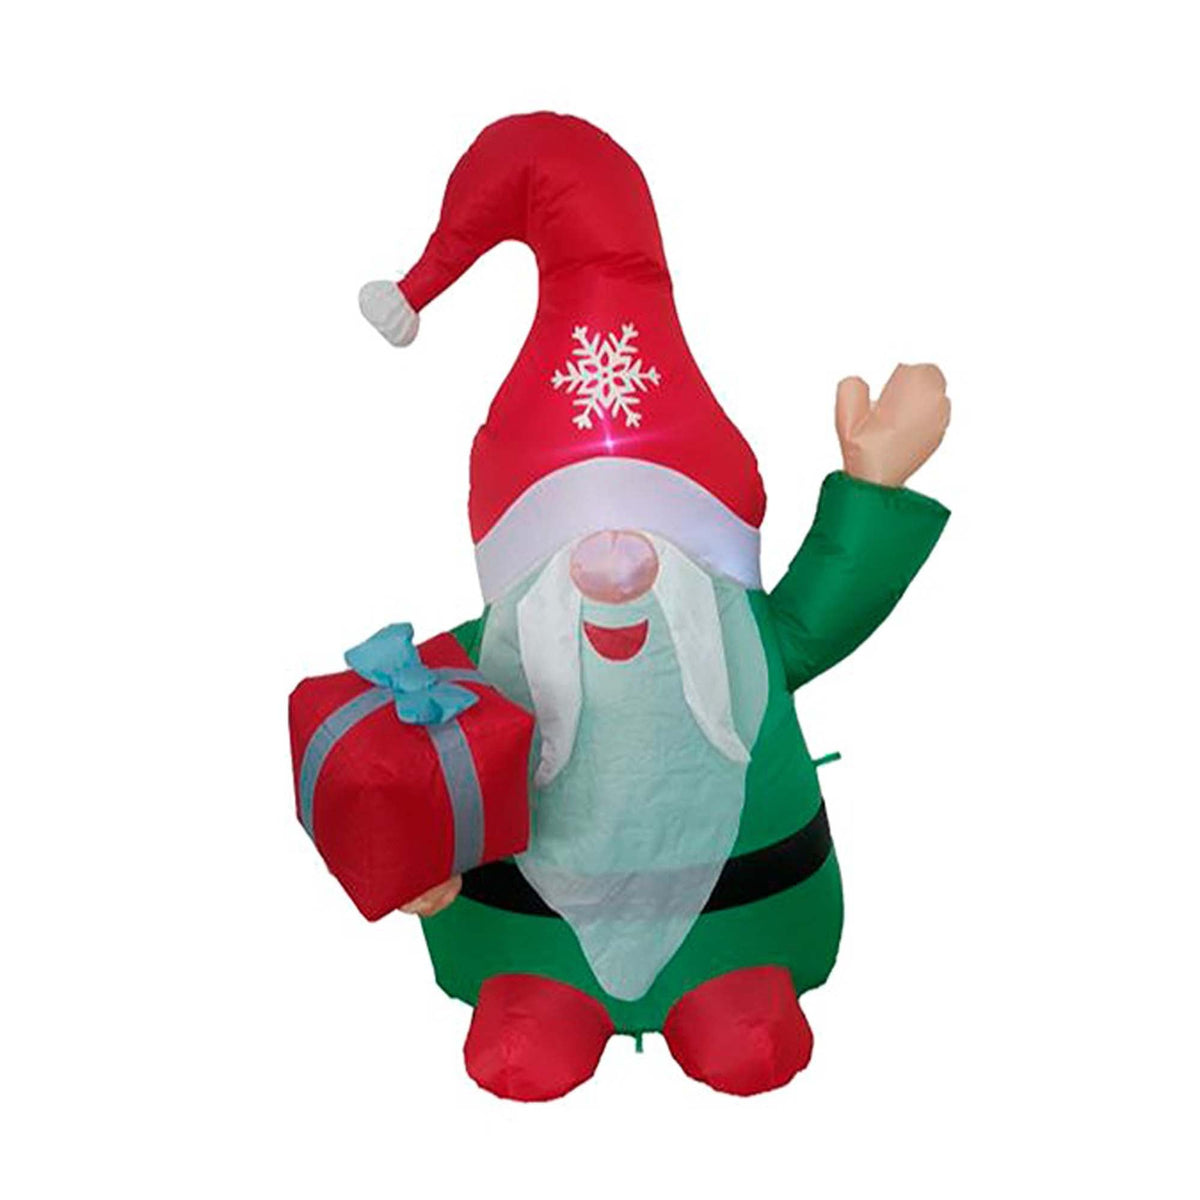 DANSON DECOR Christmas Light-Up Waving Inflatable Gnome, 48 Inches, 1 Count